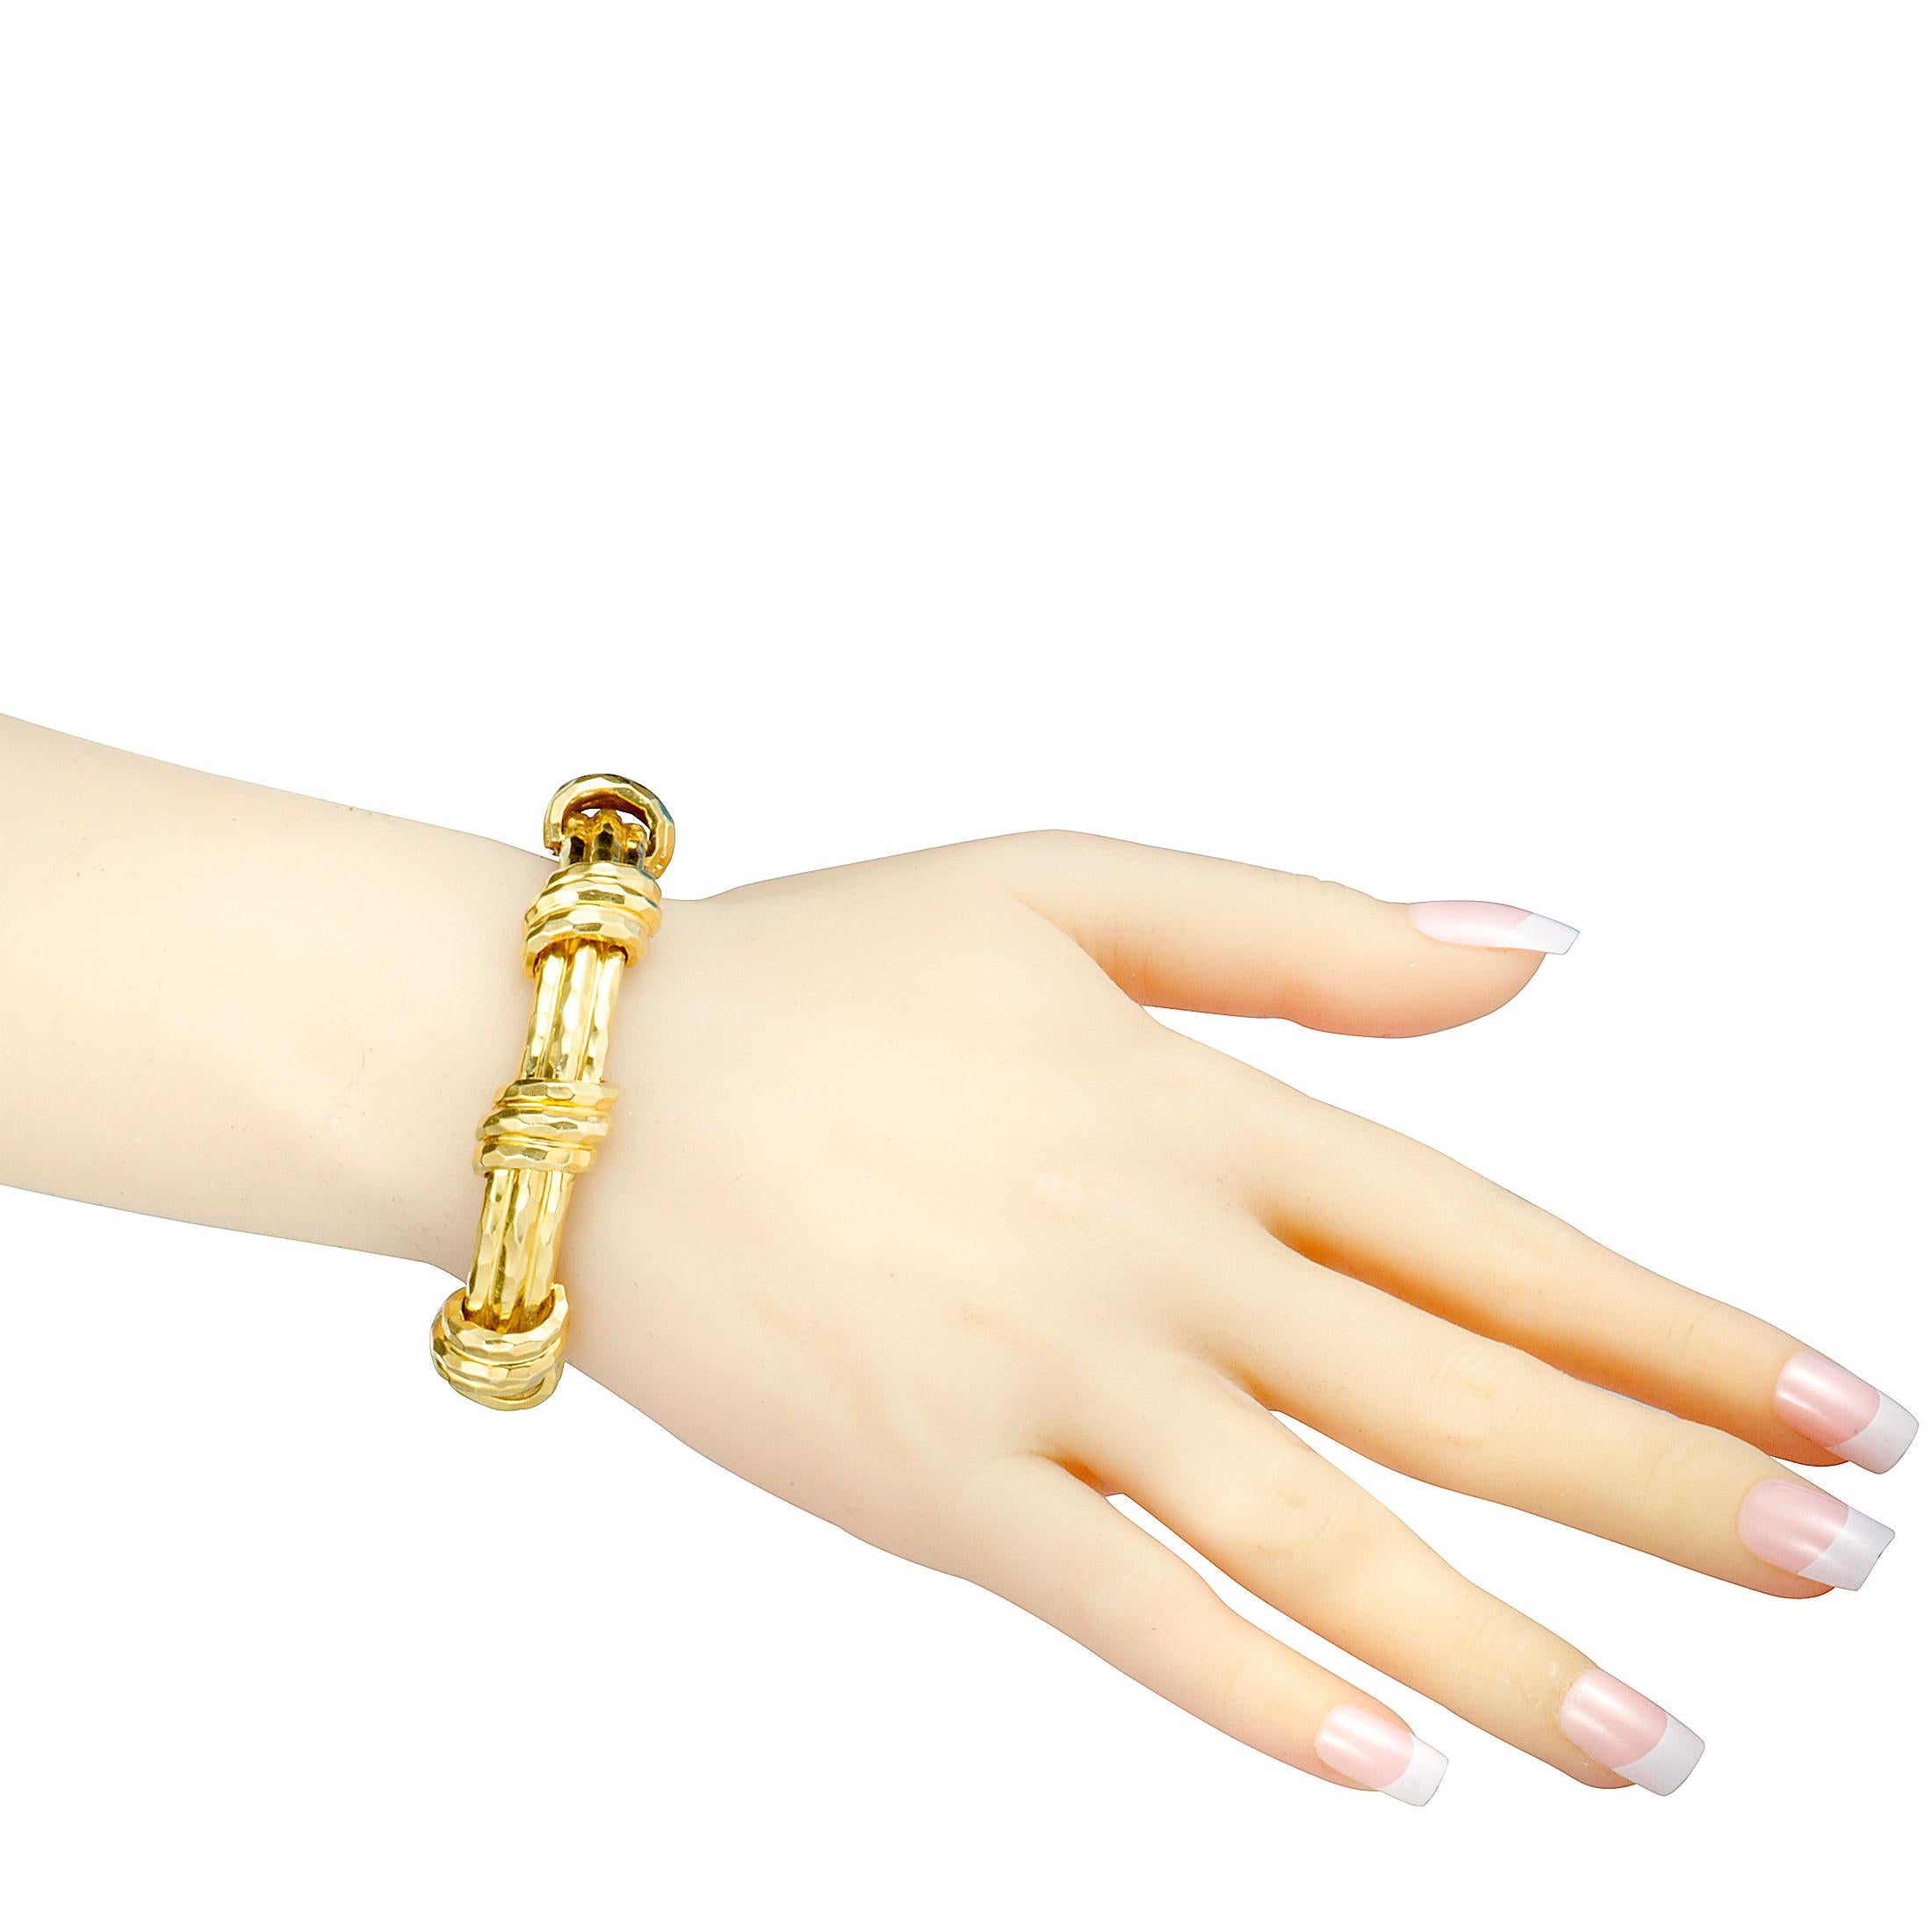 Presented in alluringly radiant 18K yellow gold and boasting exquisite hammered finish, this compelling bracelet from Henry Dunay offers an incredibly fashionable look with a distinct luxe feel about it. This superb statement piece weighs 76.3 grams.